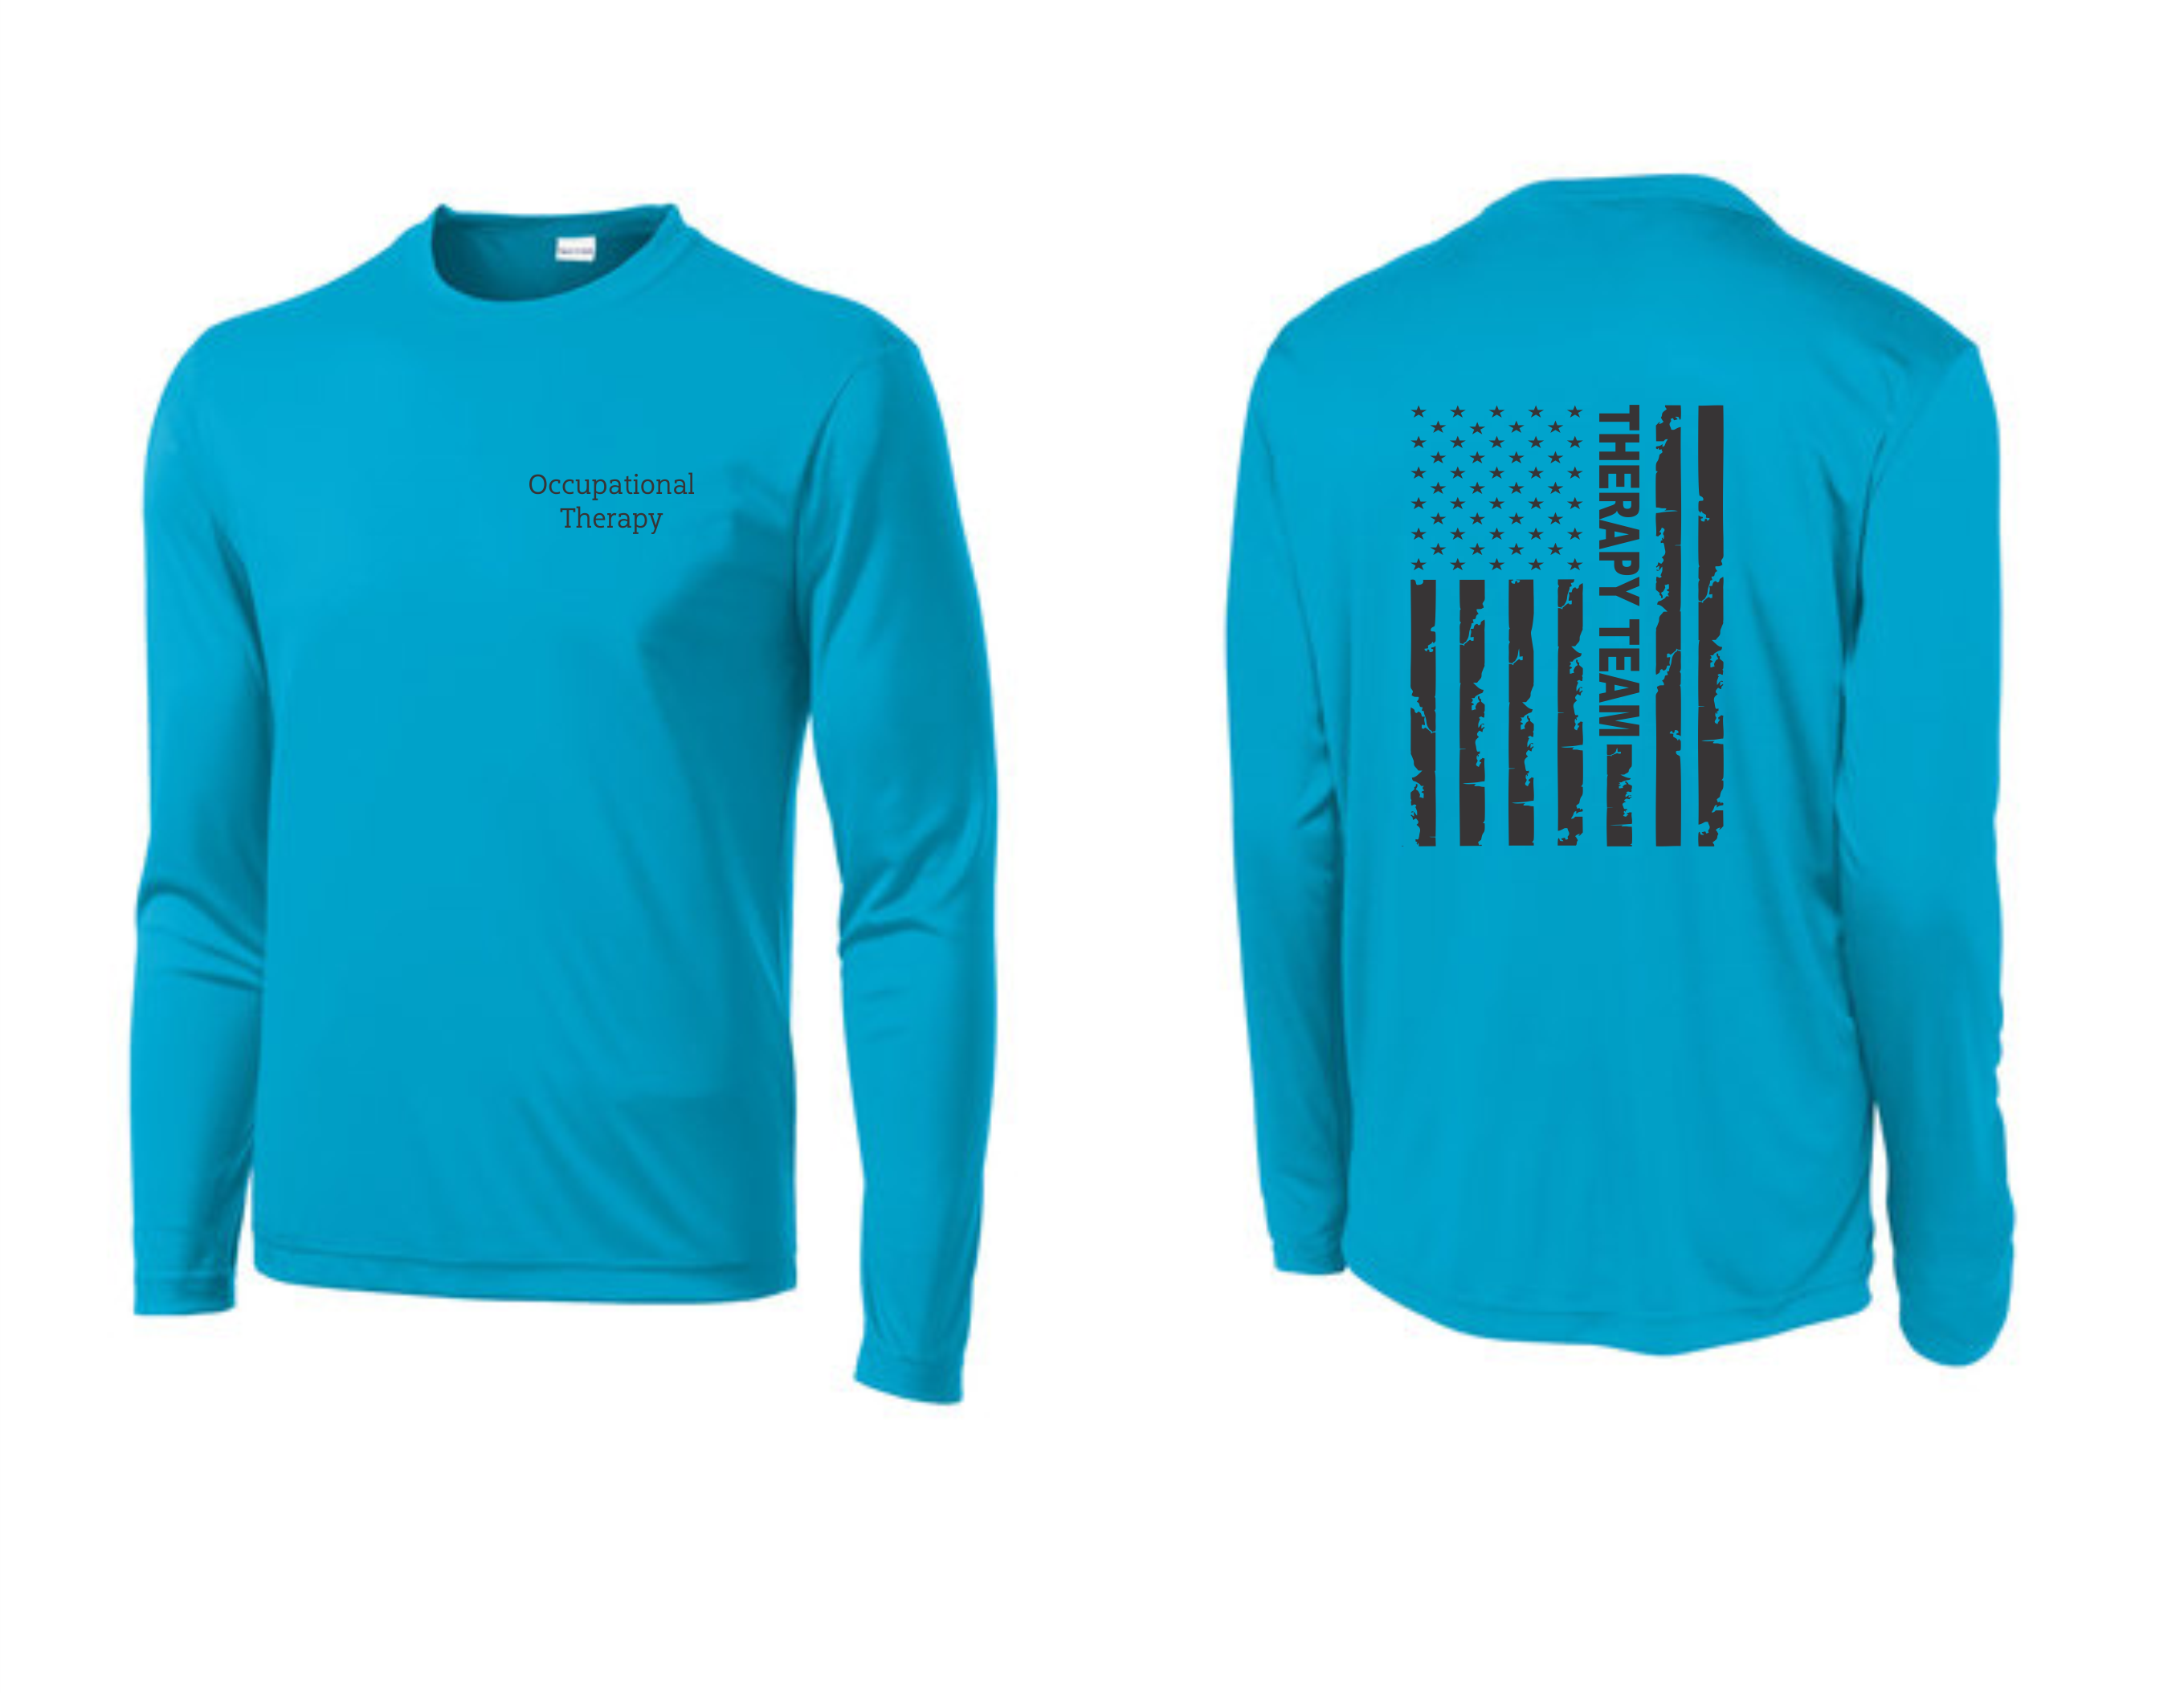 PHW - Occupational Therapy Flag - Dri-Fit Long Sleeve